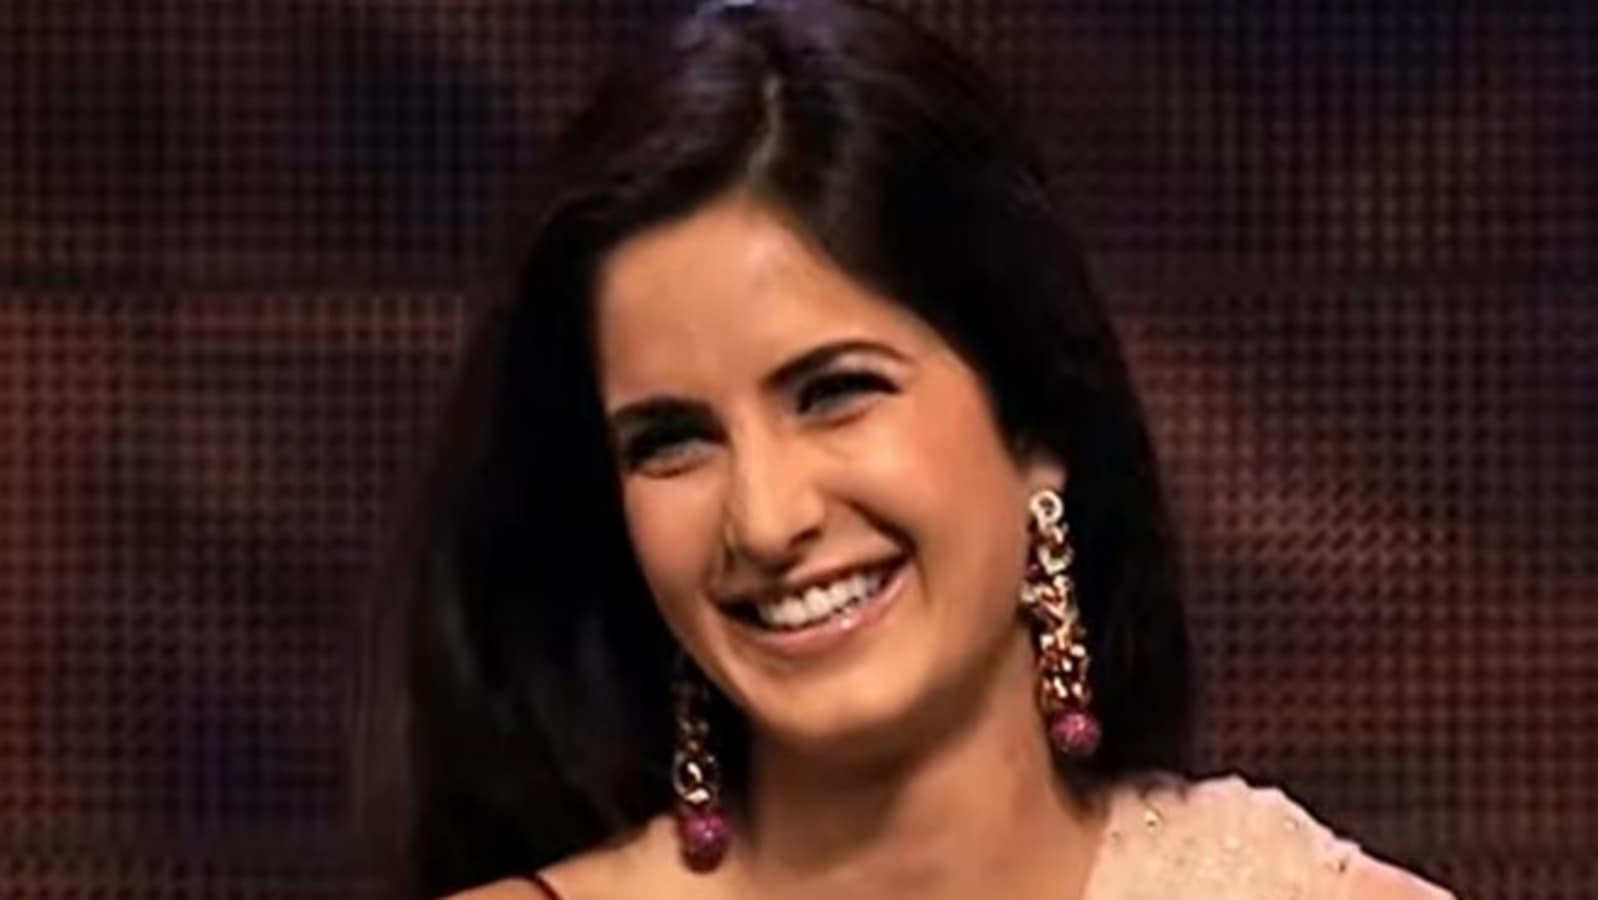 When Katrina Kaif left the audience clapping after her emotional speech about Bollywood: ‘I found my family’